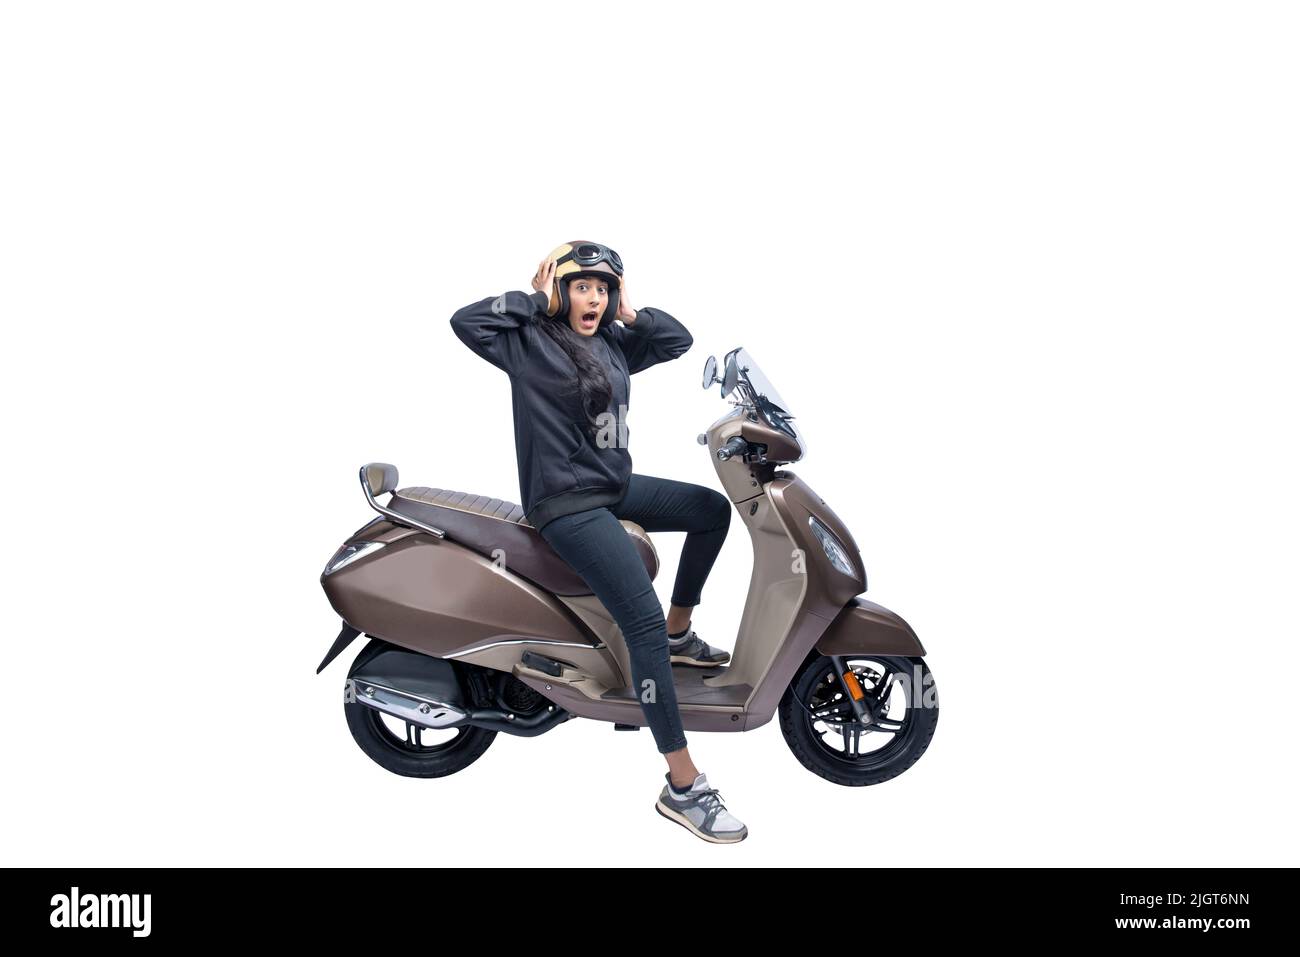 Asian woman with a helmet and jacket sitting on a scooter with a shocked expression isolated over white background Stock Photo